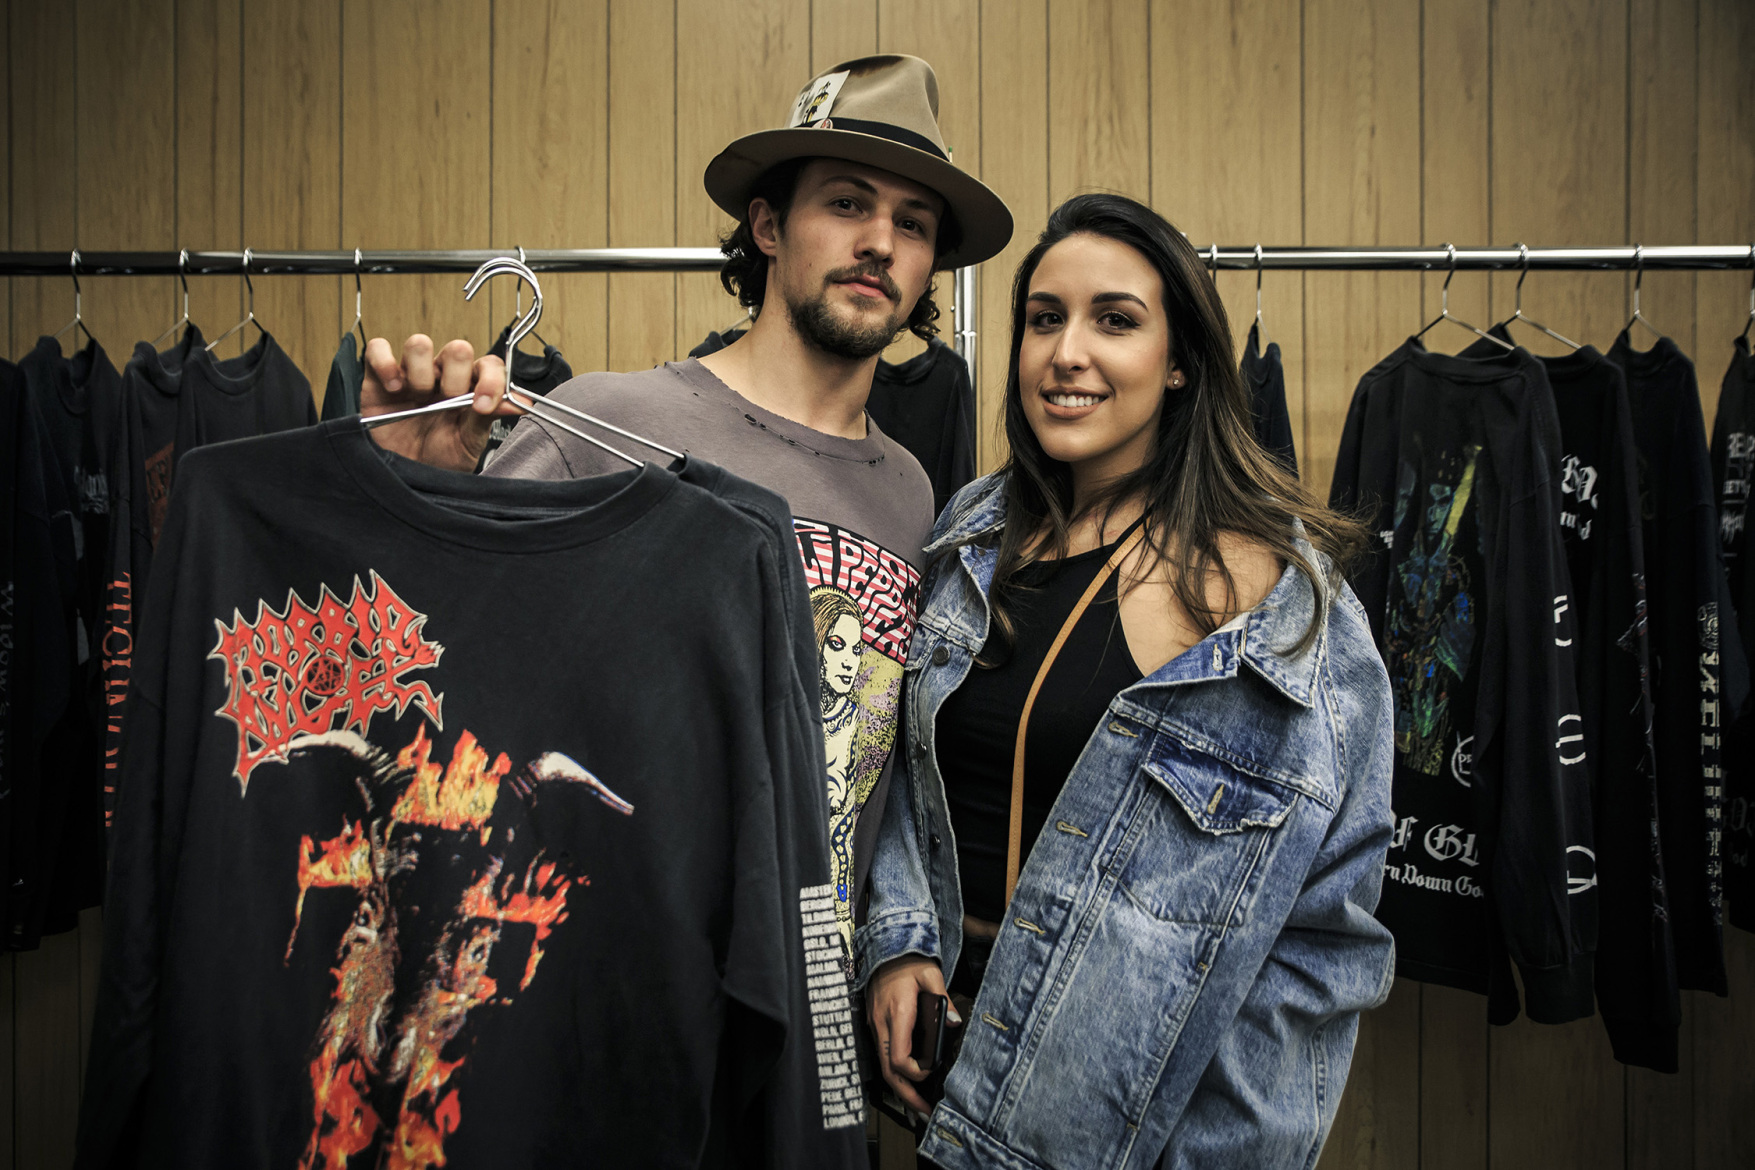 fear-of-god-pop-up-los-angeles-maxfield-26